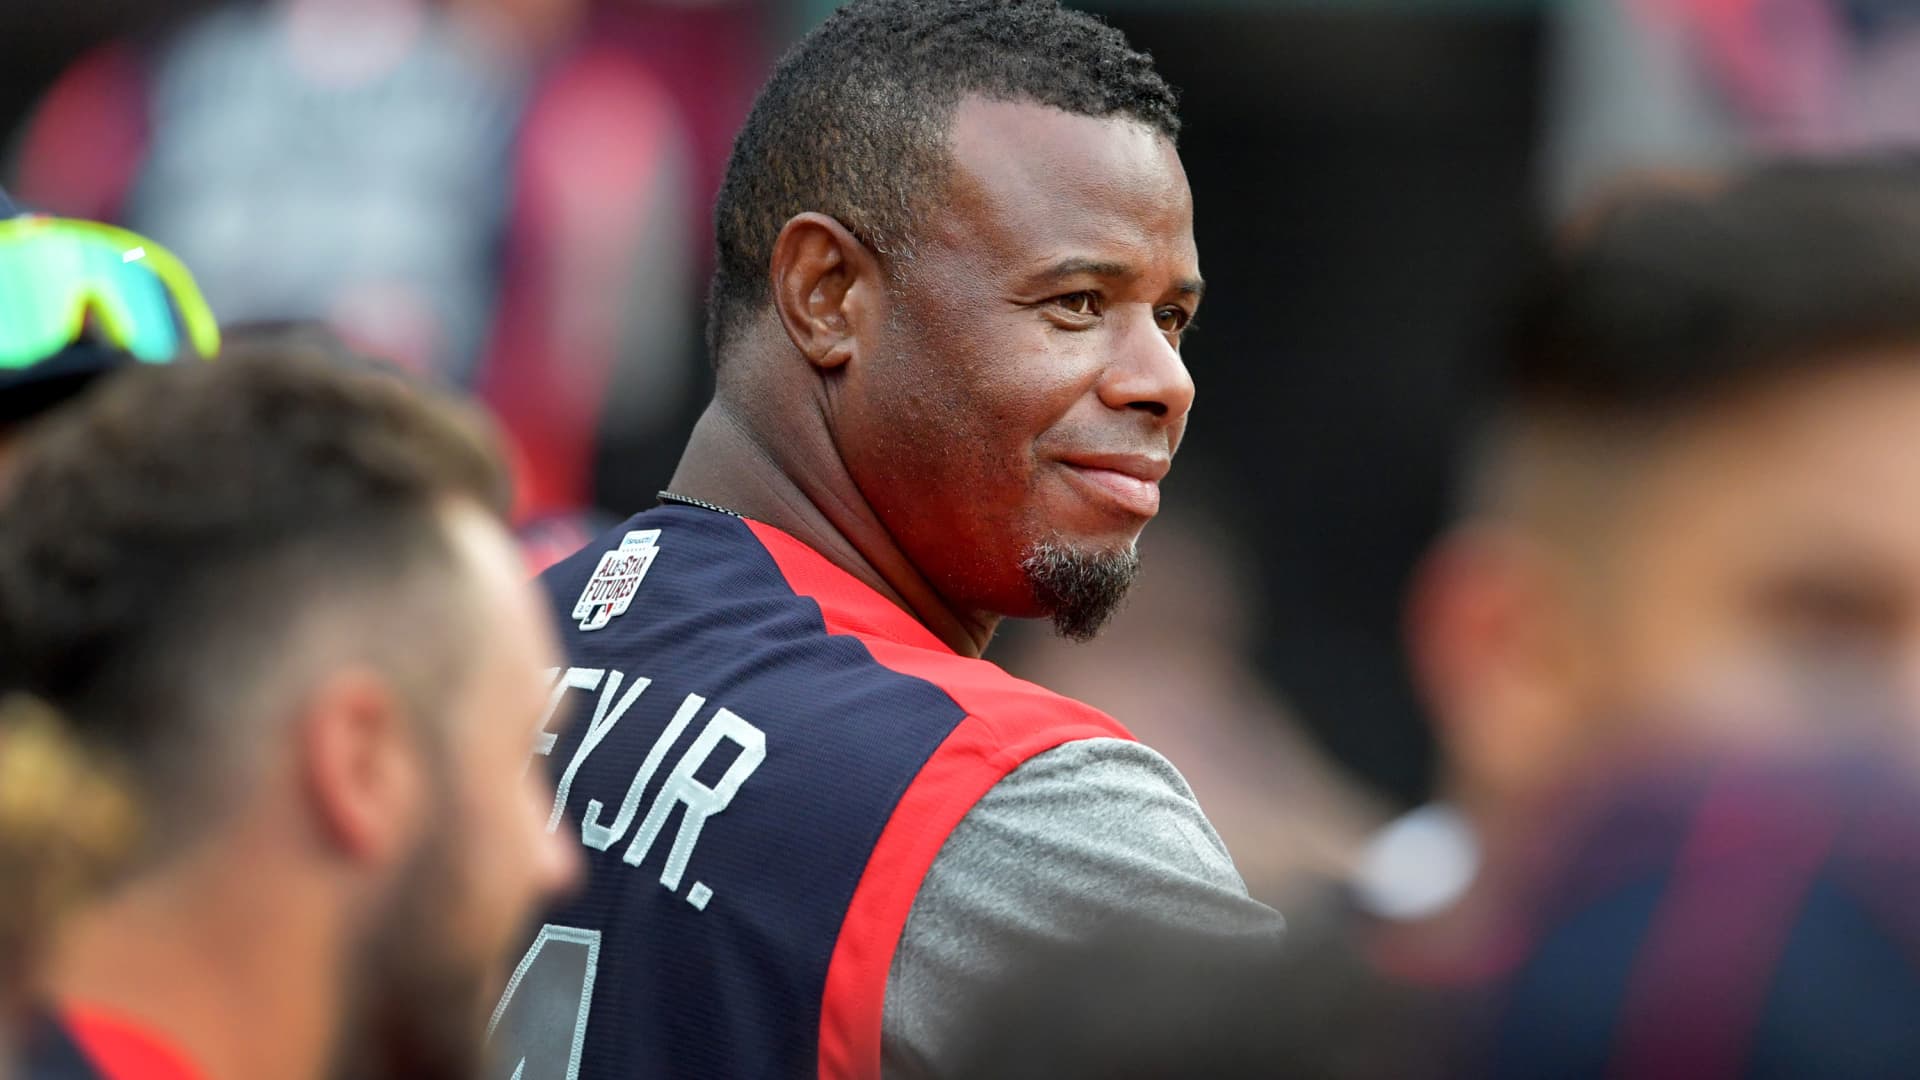 Former MLB star Ken Griffey Jr. talks with players from the dugout of the National League team during the fourth inning against the American league team during the All-Stars Futures Game at Progressive Field on July 07, 2019 in Cleveland, Ohio.